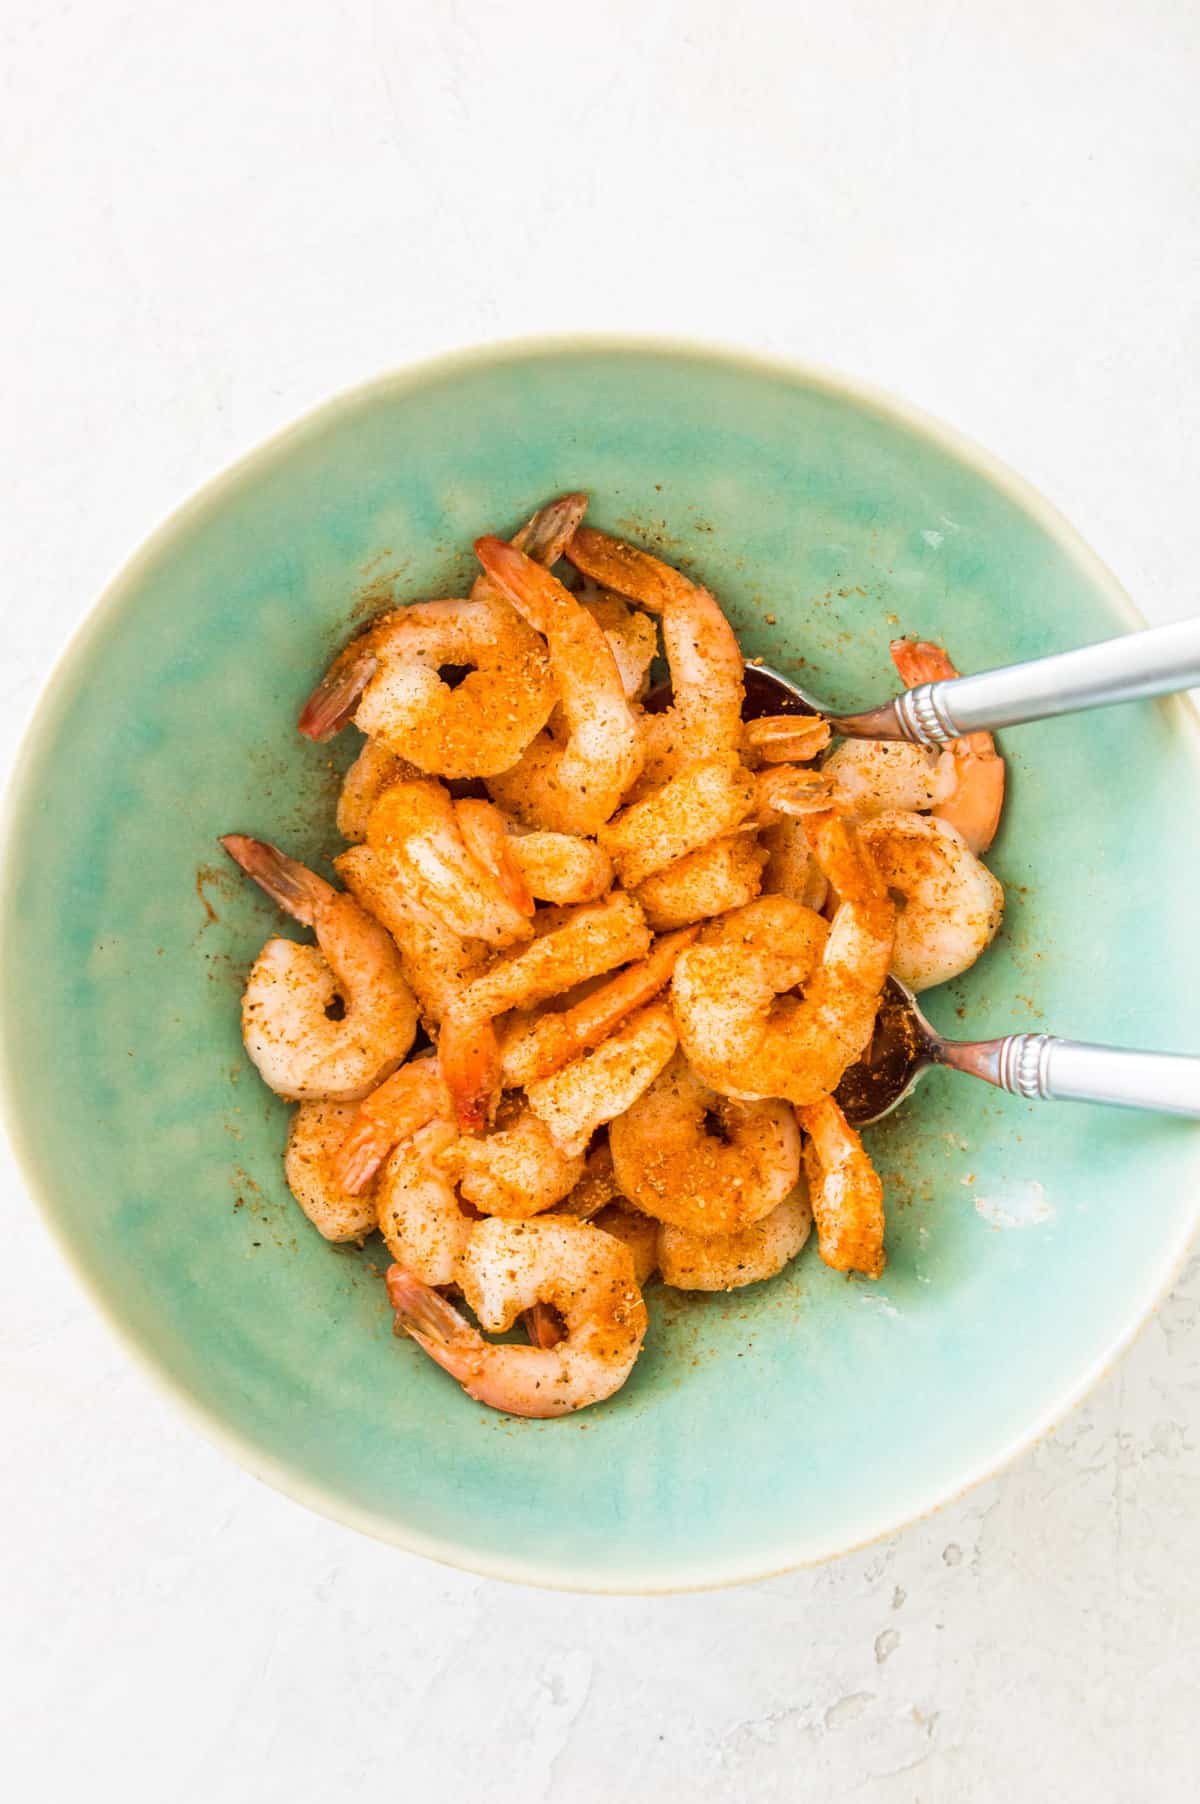 Shrimp in a bowl being tossed in a seasoning mix.